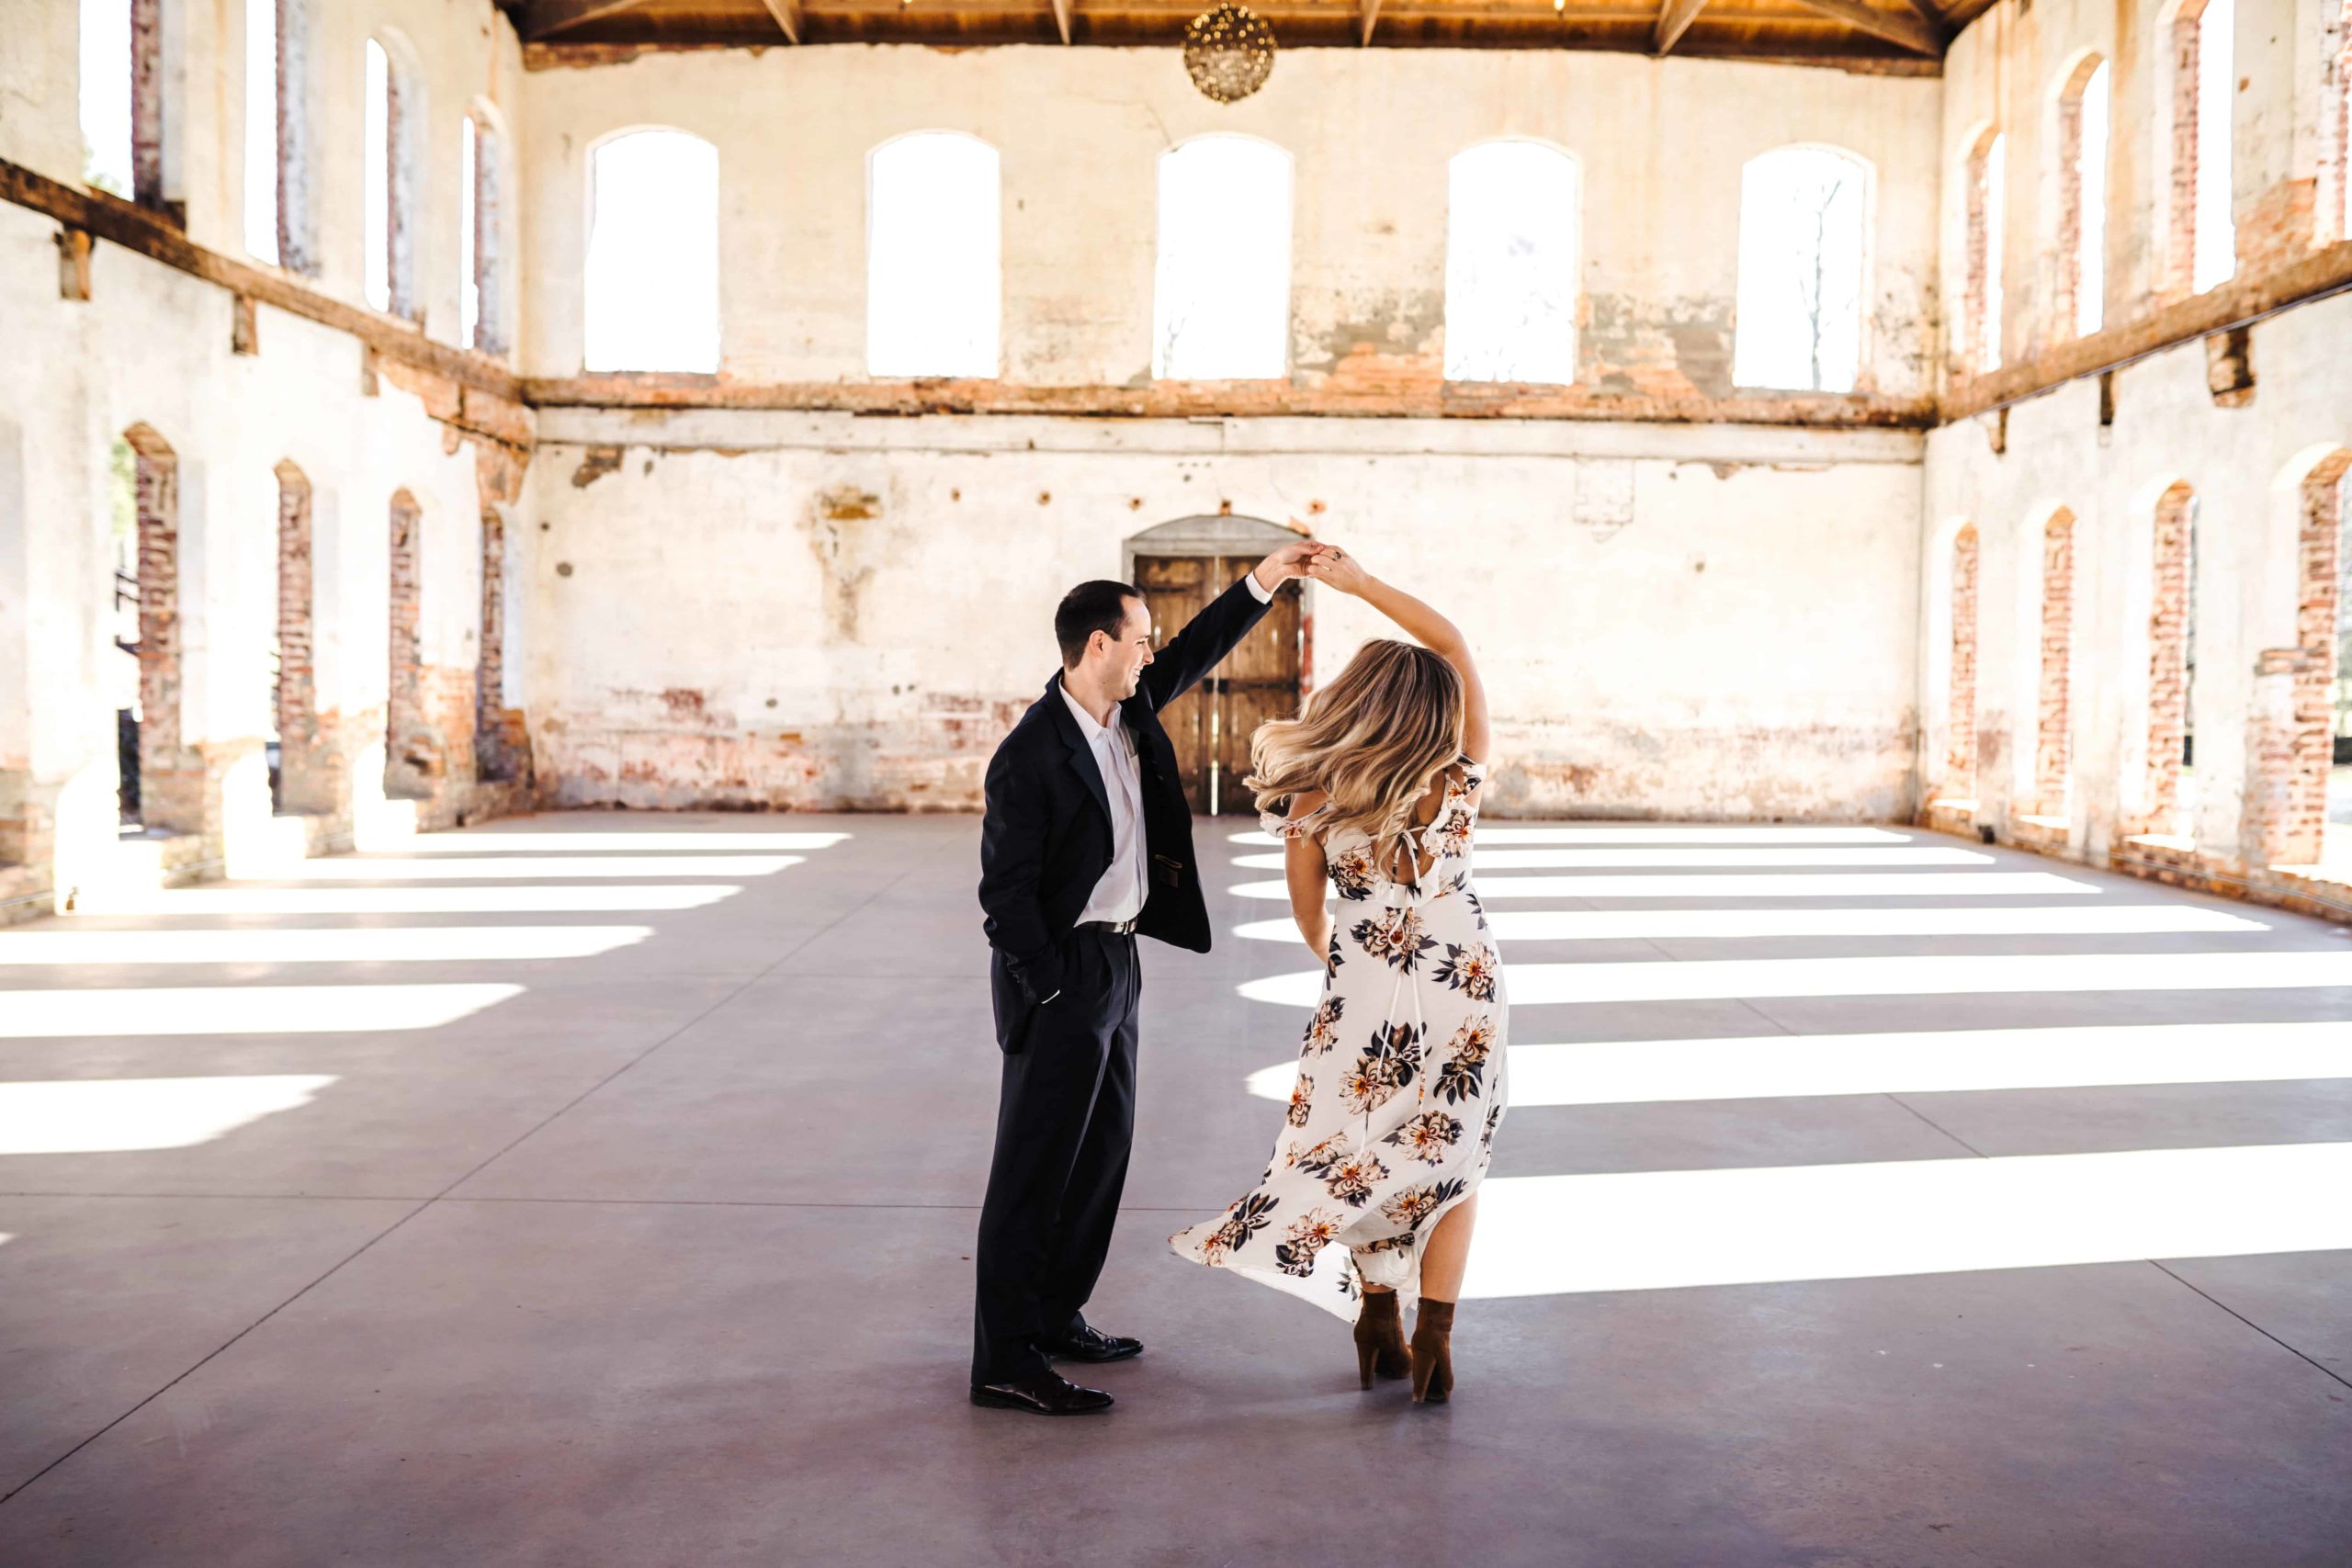 A groom-to-be twirling his bride-to-be in the interior of The A couple with a sweet embrace at Providence Cotton Mill during their Engagement Session